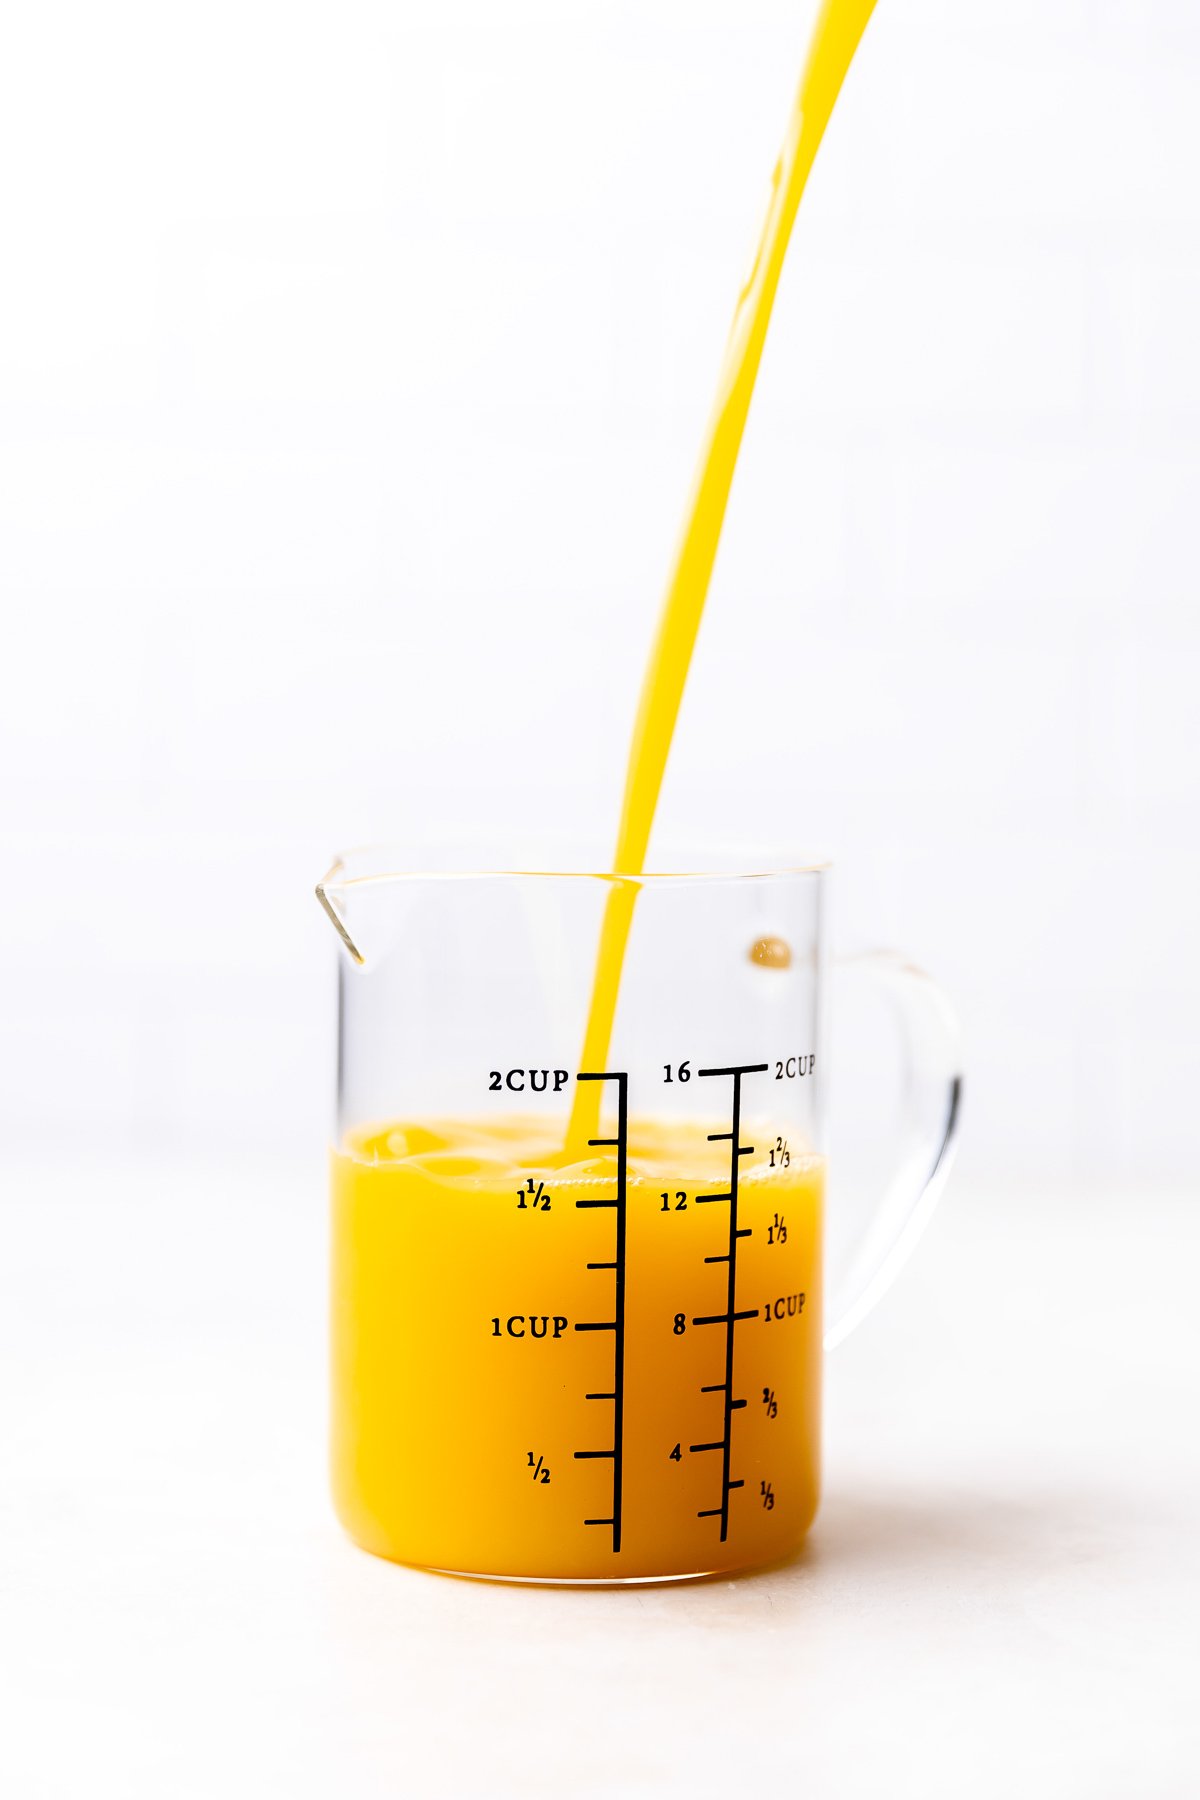 Florida orange juice is poured into a large glass measuring cup for orange chicken stir fry. The measuring cup rests atop a creamy white textured surface.